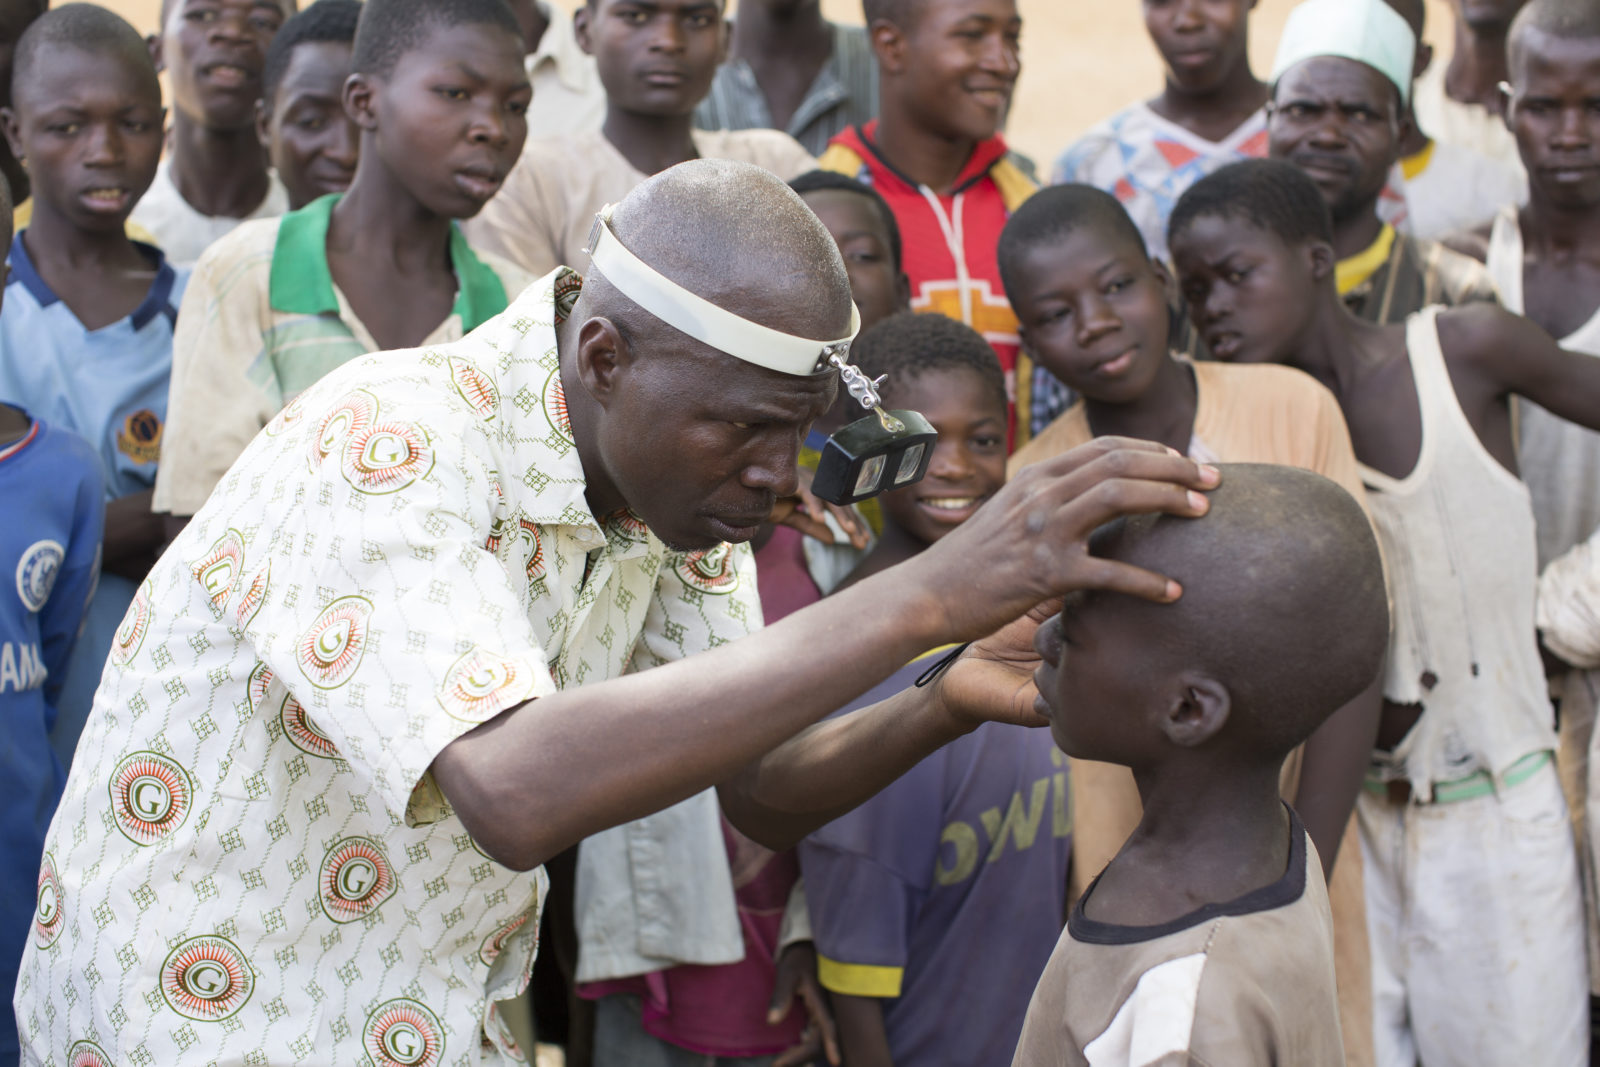 A health worker checks the eyes of a child for signs of disease. Other children are standing behind watching.